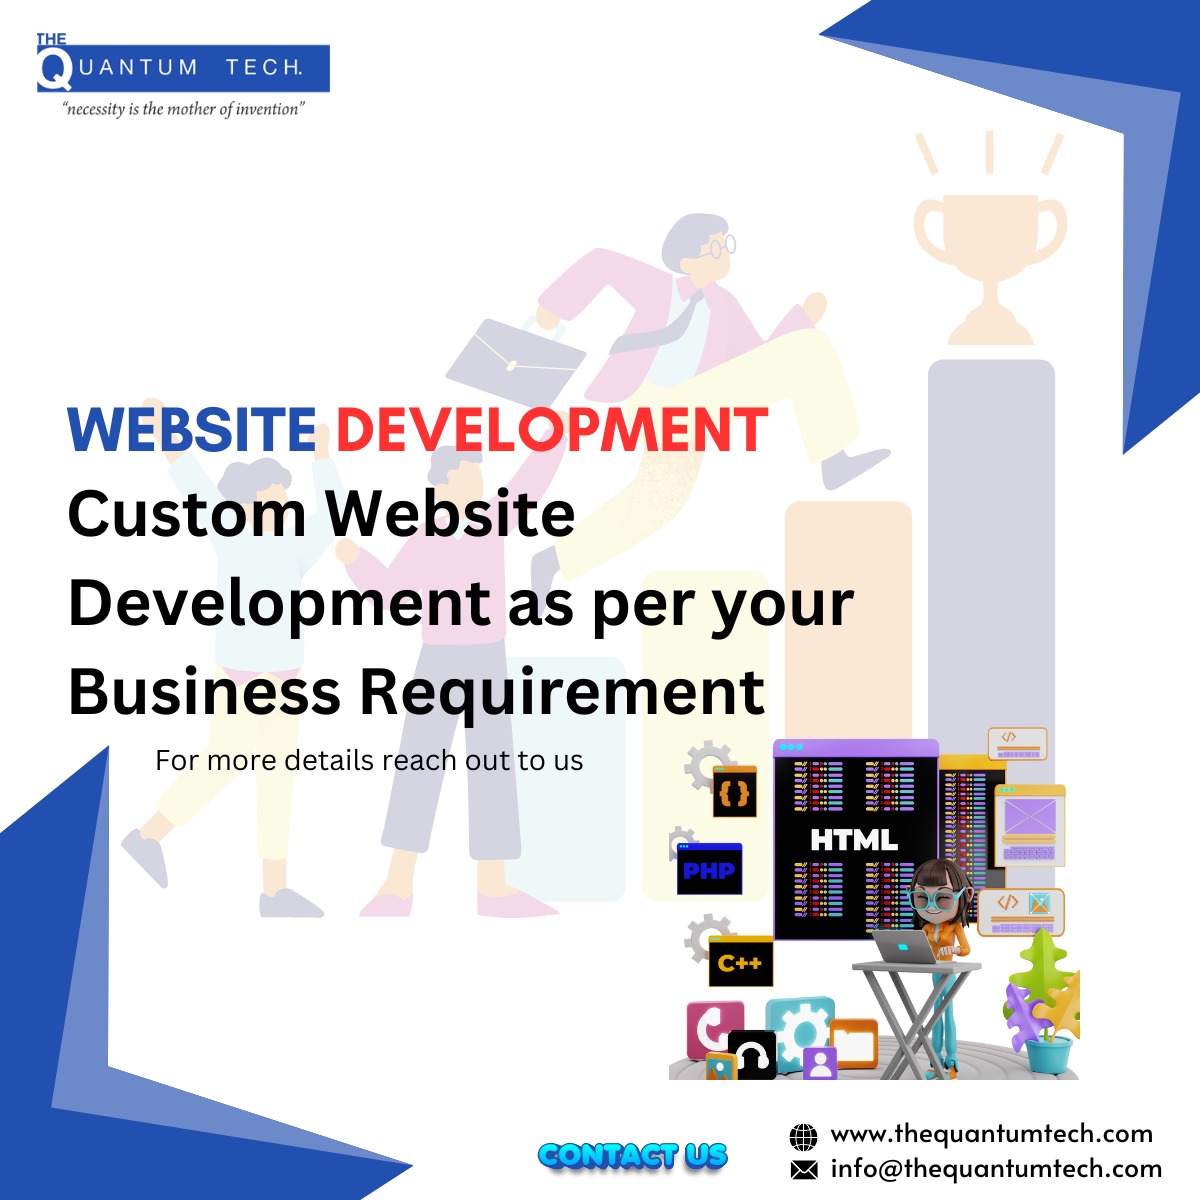 'Bring your Ideas to life, with our Custom Website Development Services.'

#webdevelopment #webappdevelopment #webdeveloper #ideasthatwork #customerexperience #customwebsites #customwebdevelopment #businessgrowthexpert